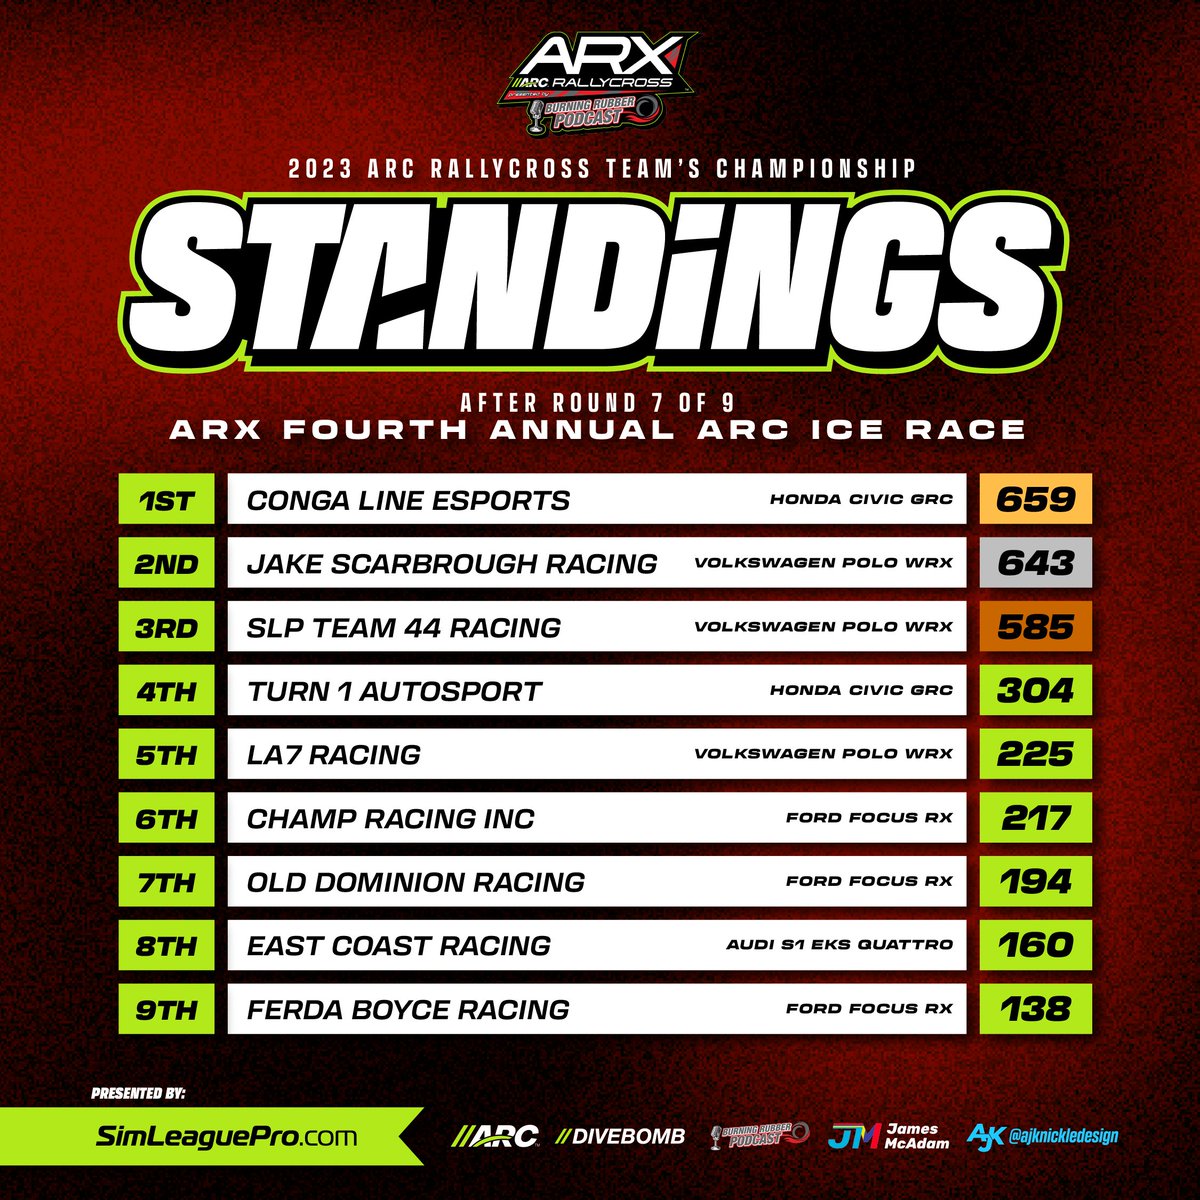 The ARX Rallycross Championship is heating up with only 2 events left, & it's absolutely all on the table for our top 4!

@projectdivebomb @simleaguepro @br_podcast @james__mcadam @ajknickledesign #esports #leagueracing #motorsports